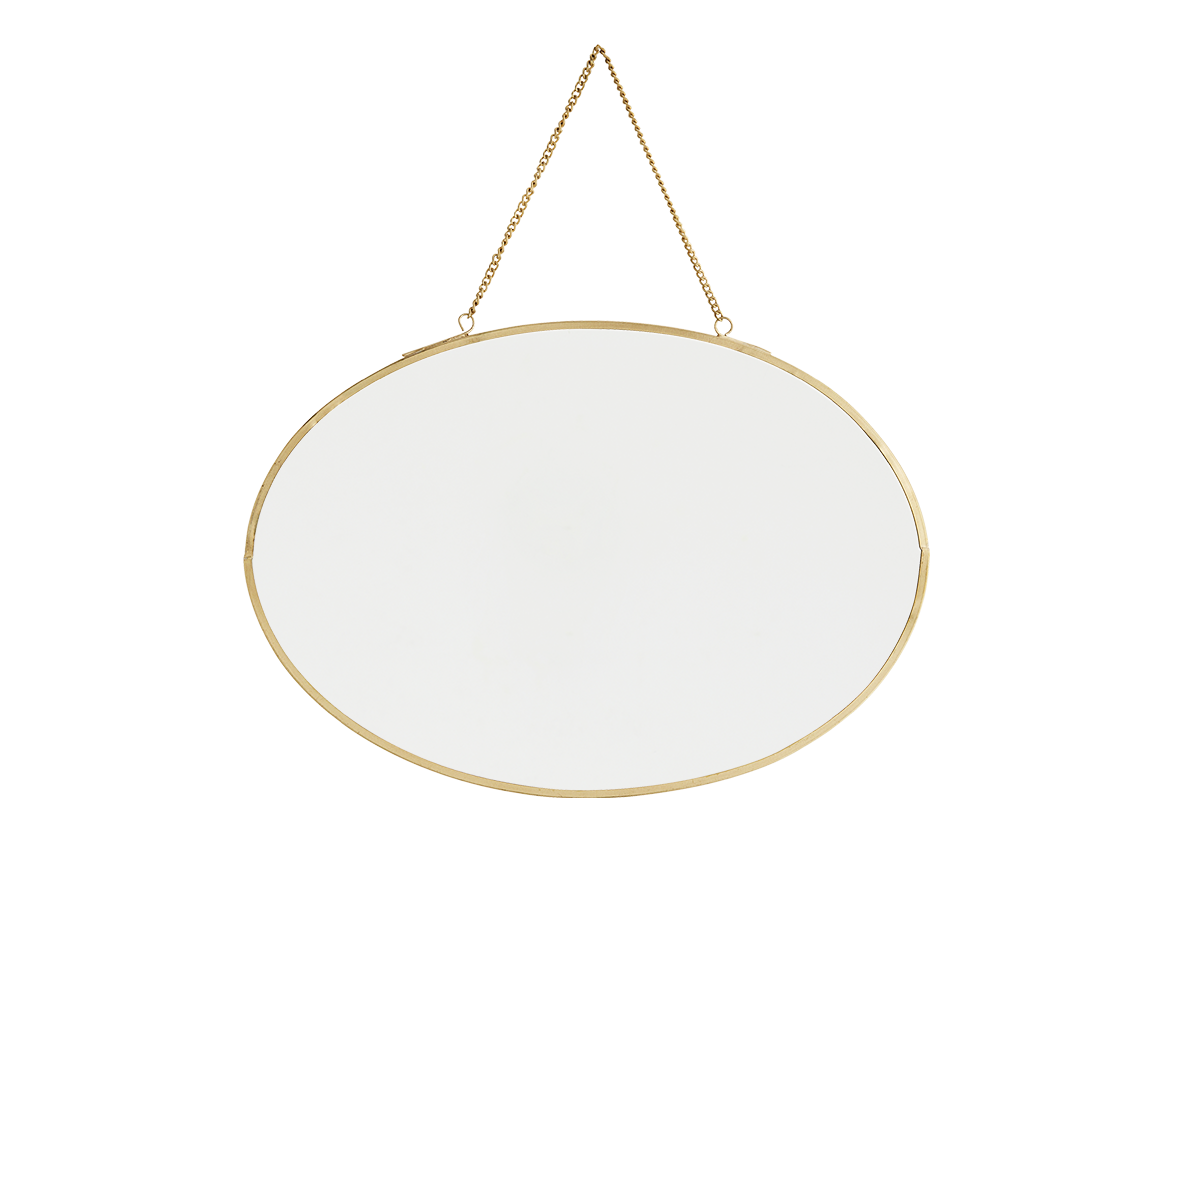 Oval hanging mirror